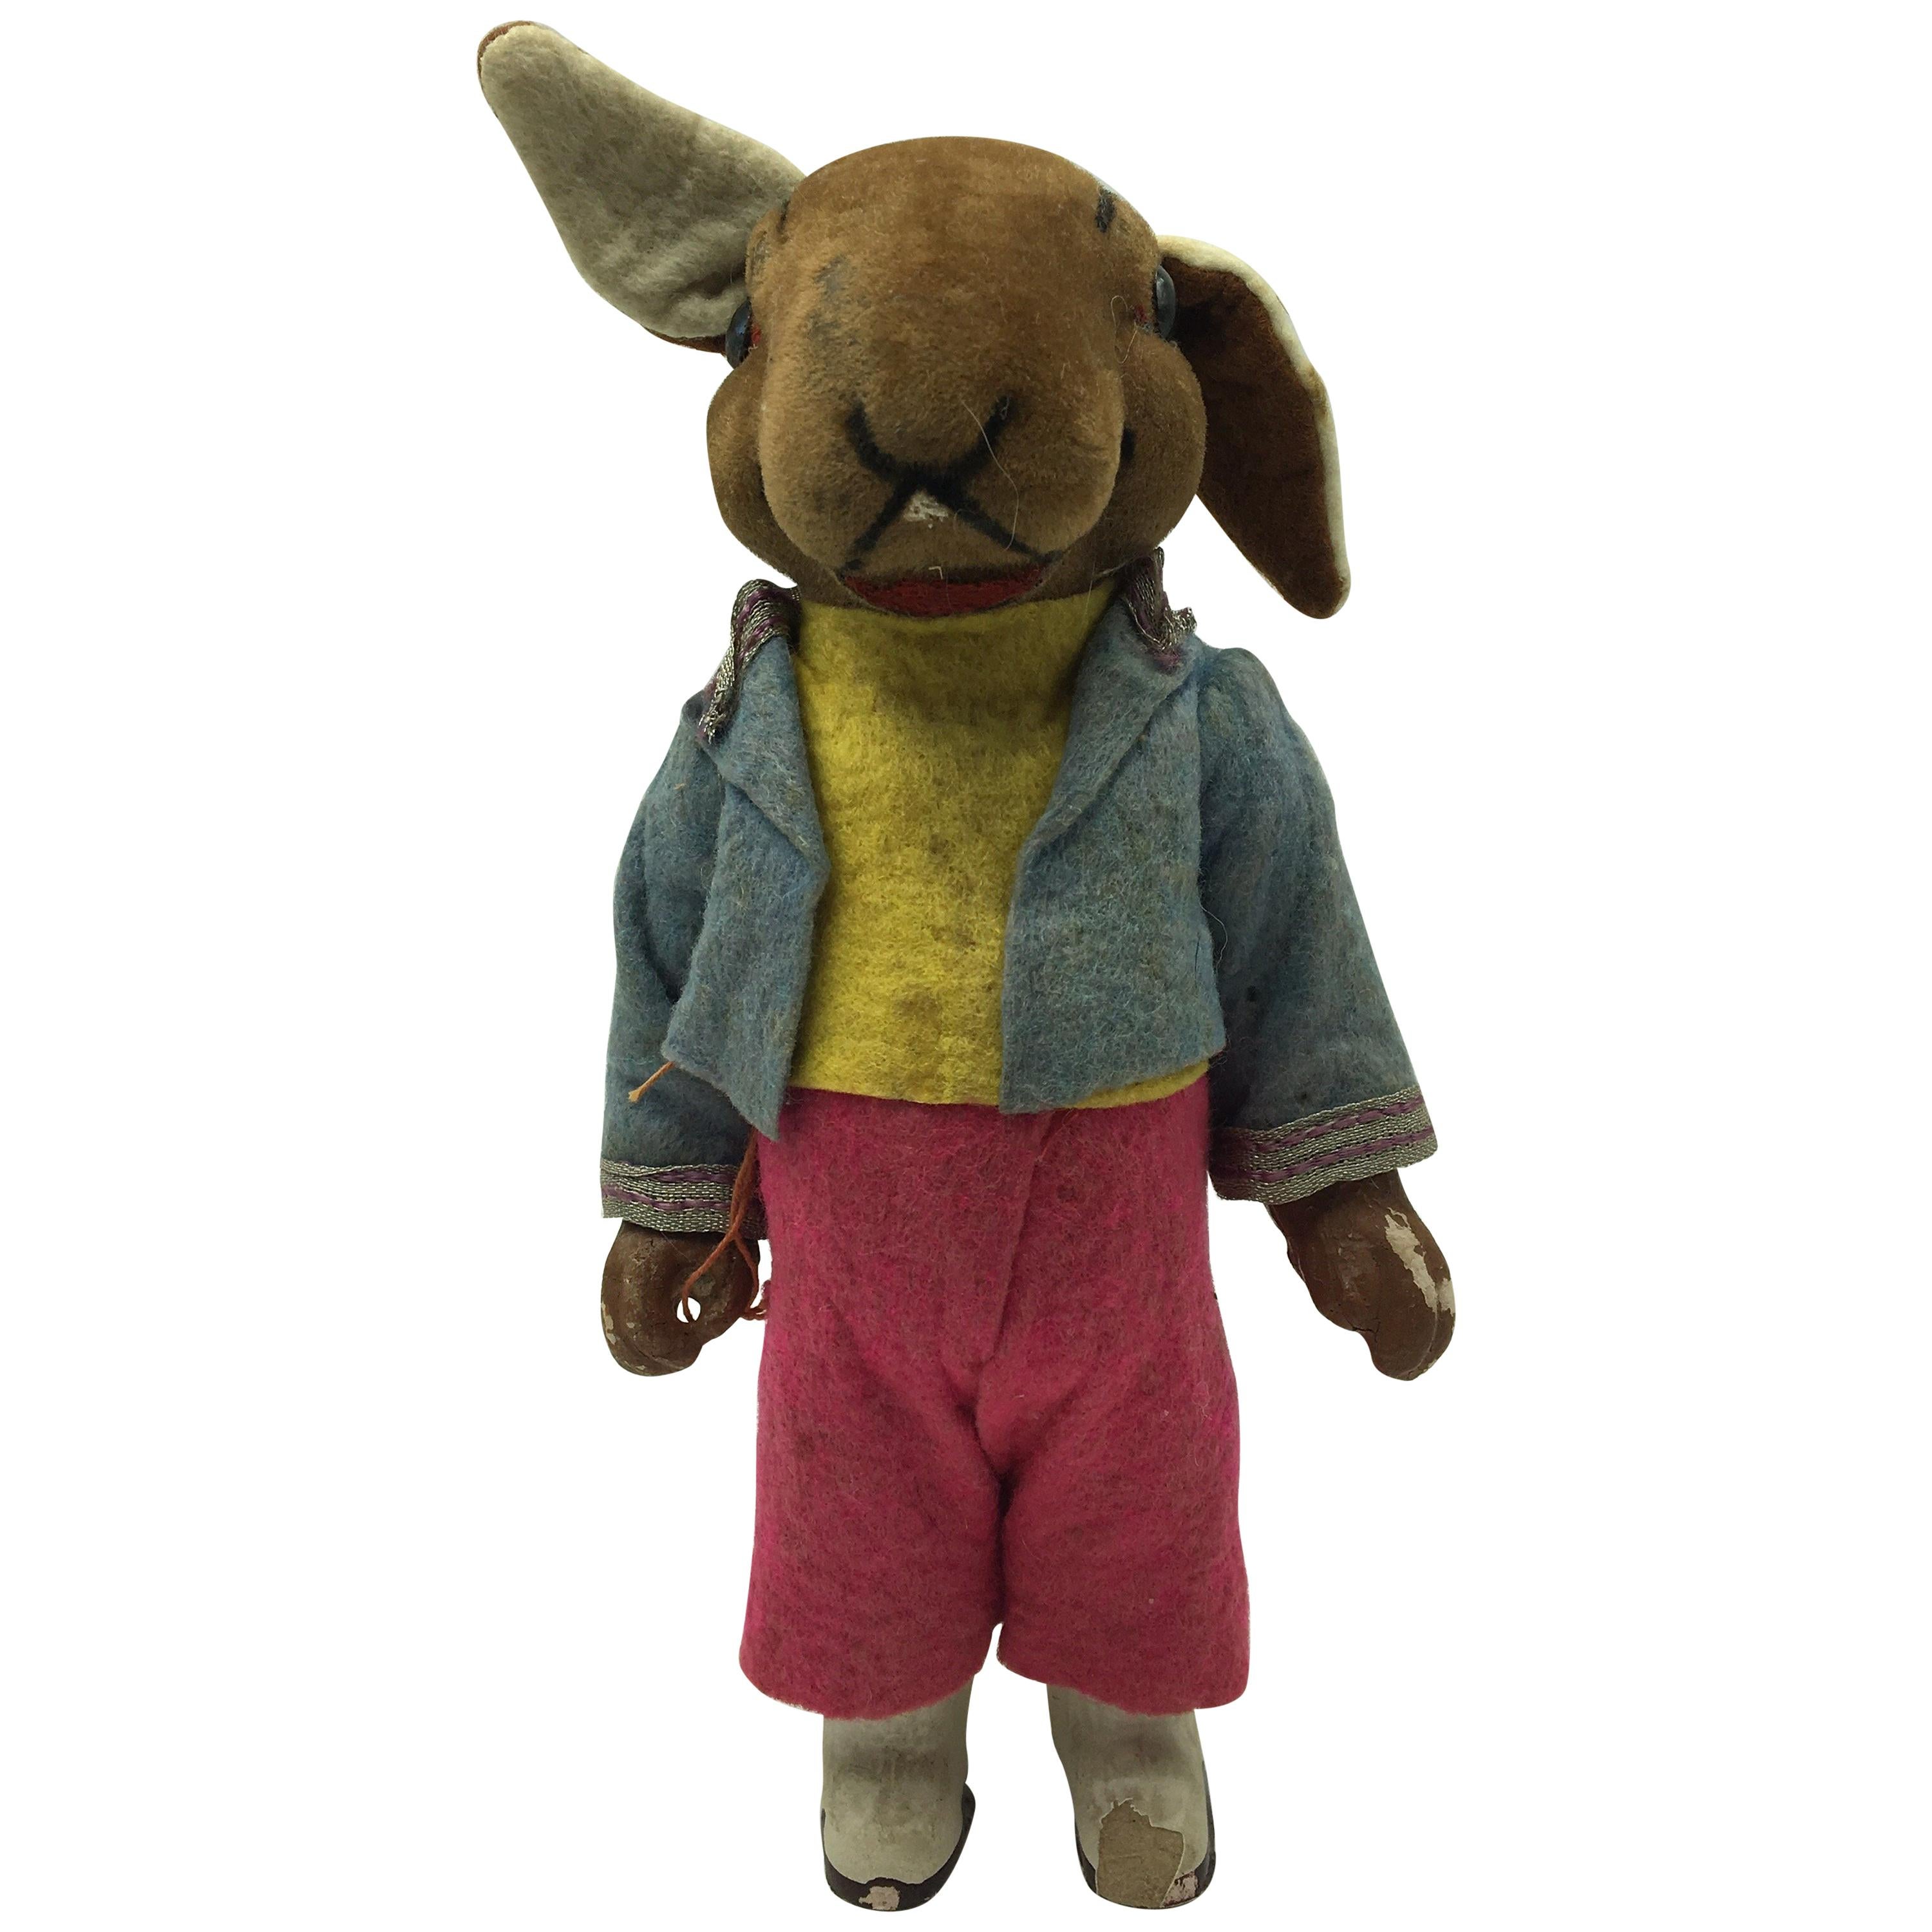 Rabbit Toy Made of Textile and Carton, US, 1950s For Sale